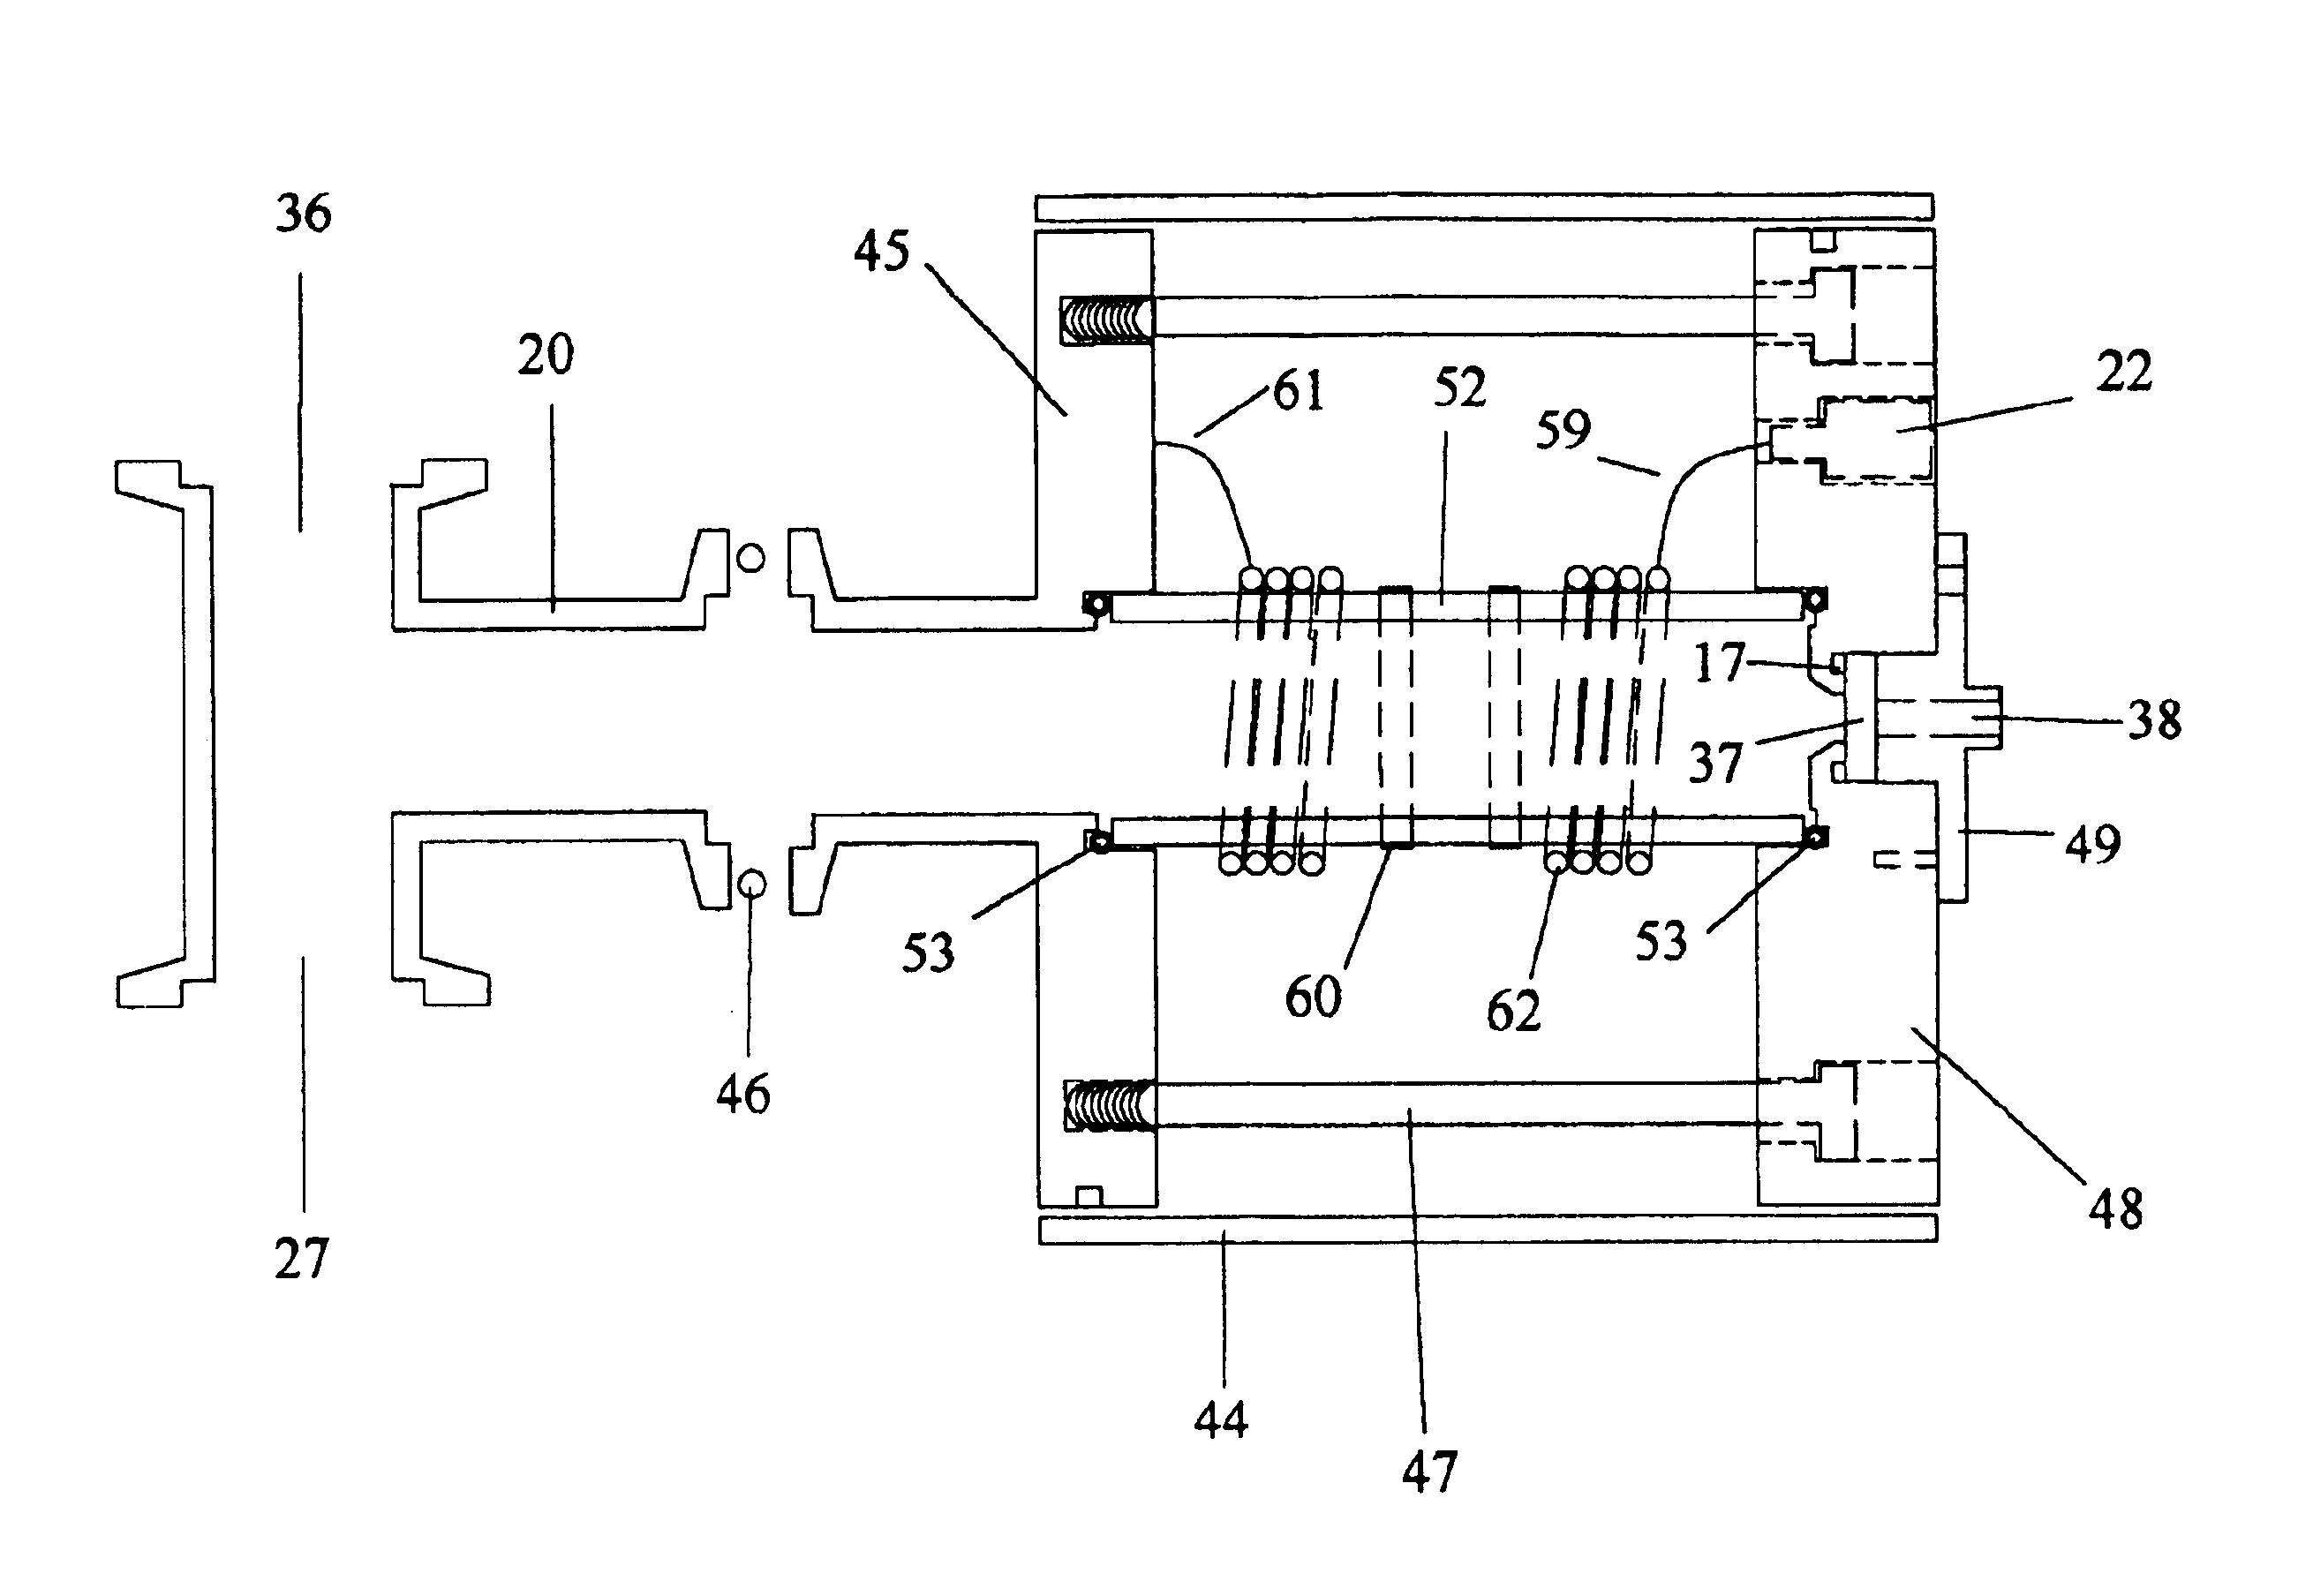 Inductively coupled plasma spectrometer for process diagnostics and control